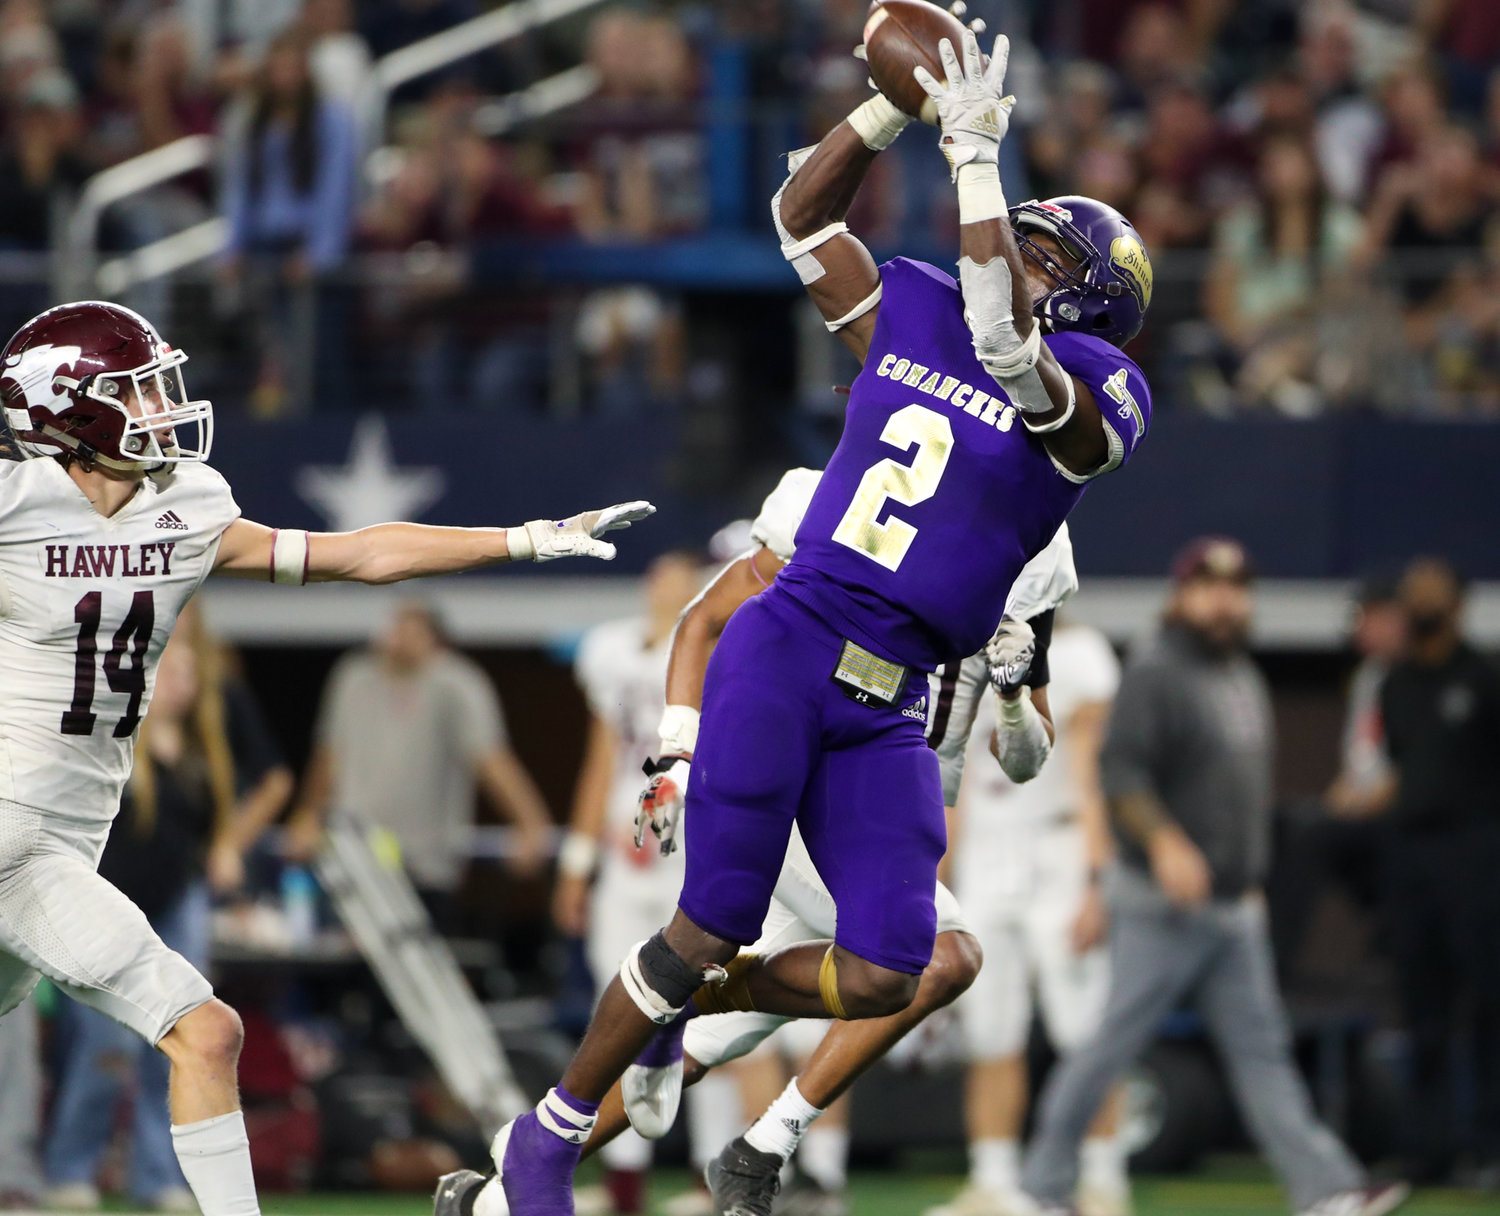 Shiner Comanches junior Dalton Brooks (2) brings in a pass during the Class 2A Division I state football championship game between Shiner and Hawley on December 15, 2021 in Arlington, Texas.